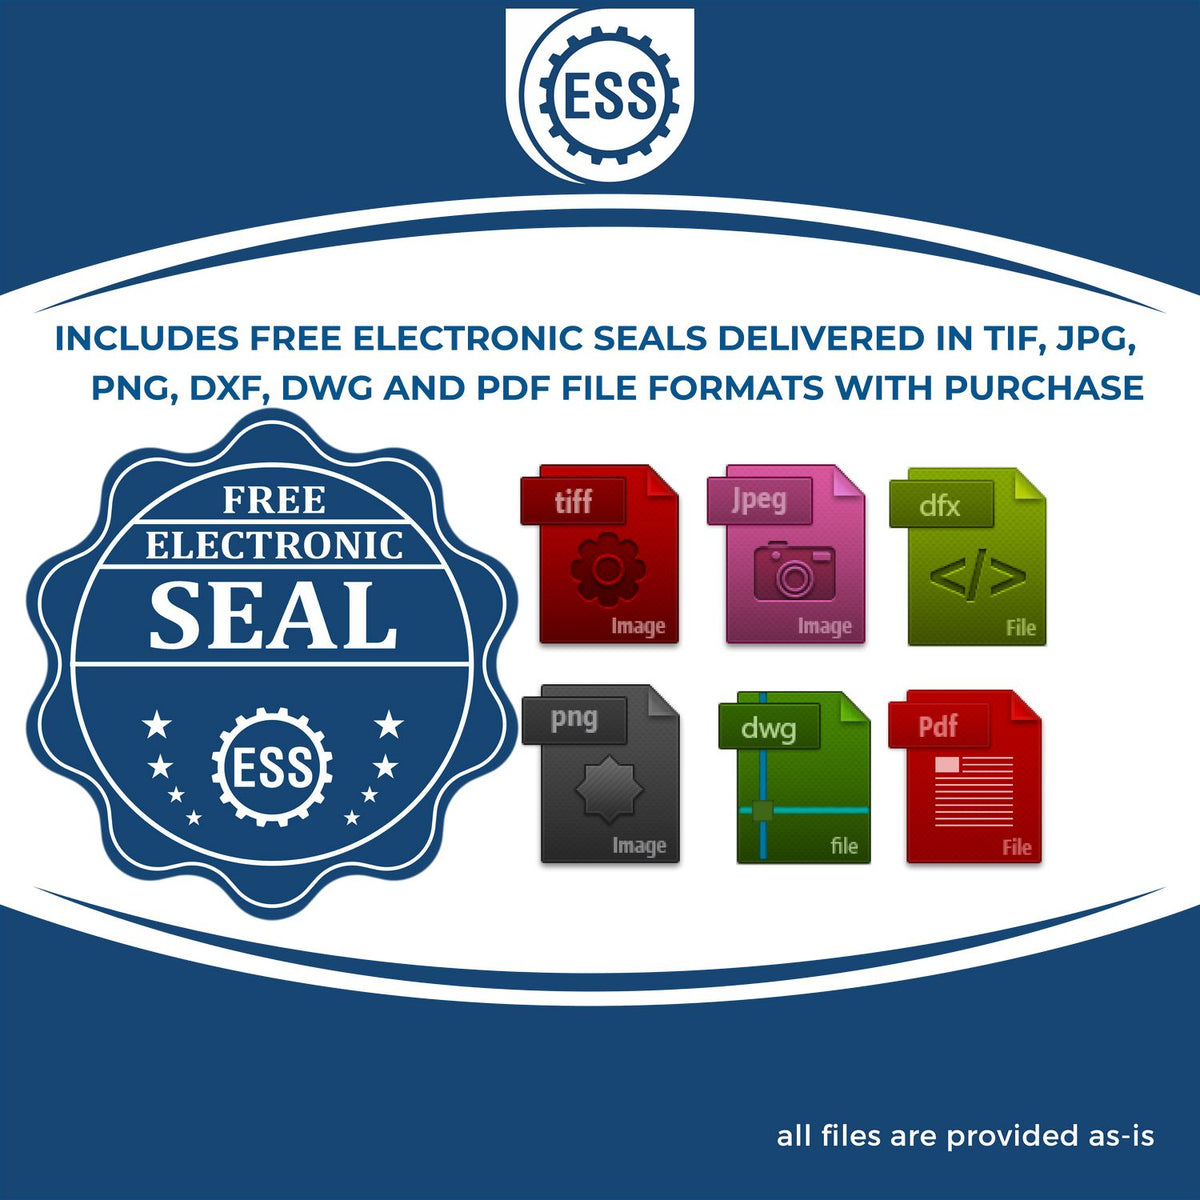 An infographic for the free electronic seal for the Handheld Colorado Land Surveyor Seal illustrating the different file type icons such as DXF, DWG, TIF, JPG and PNG.